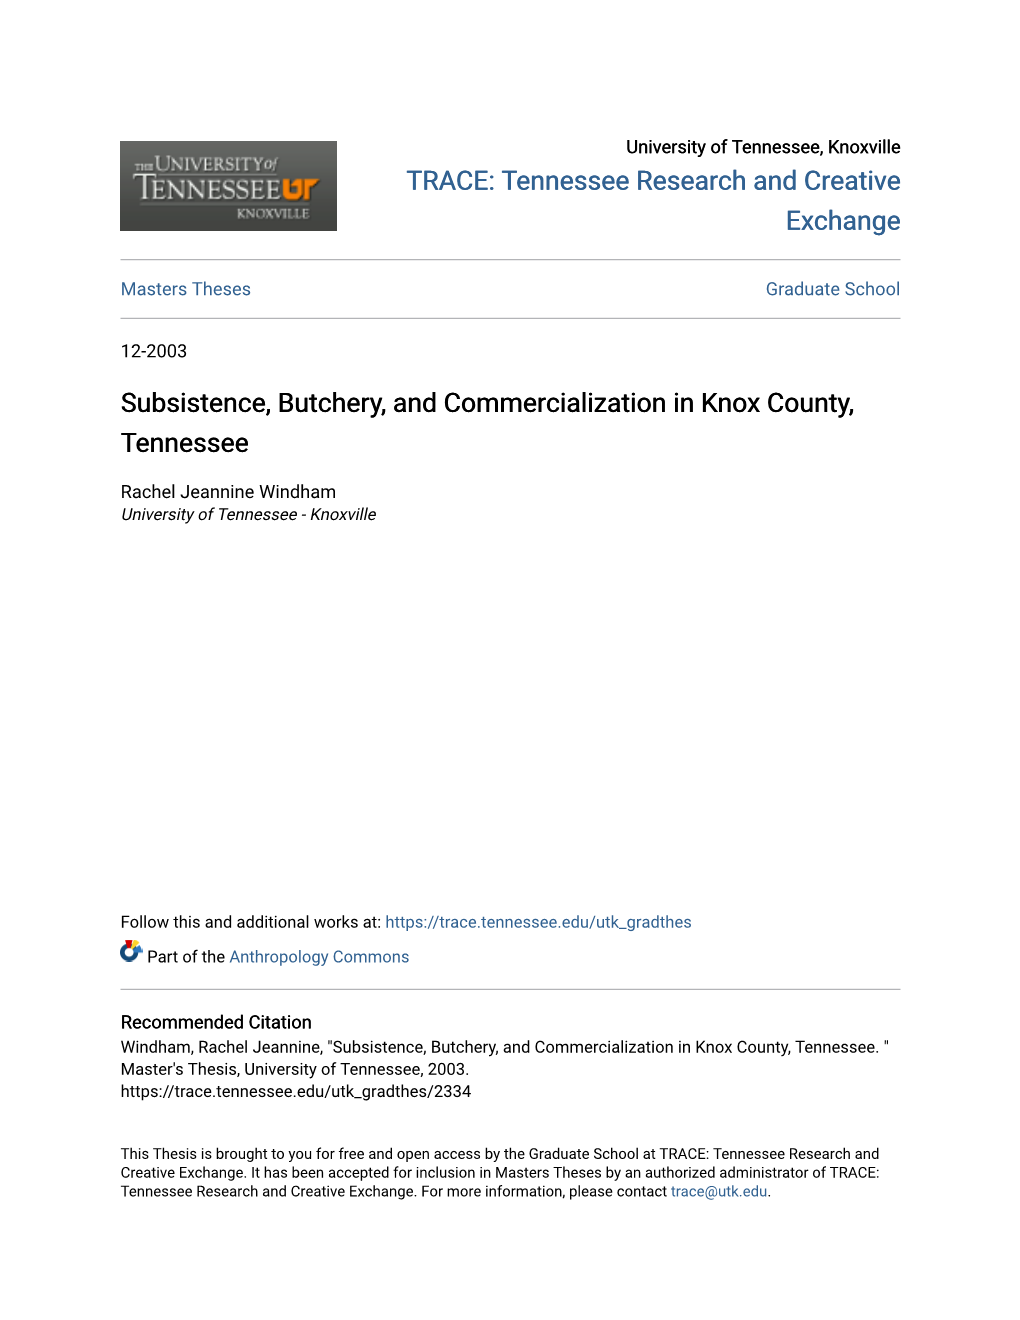 Subsistence, Butchery, and Commercialization in Knox County, Tennessee